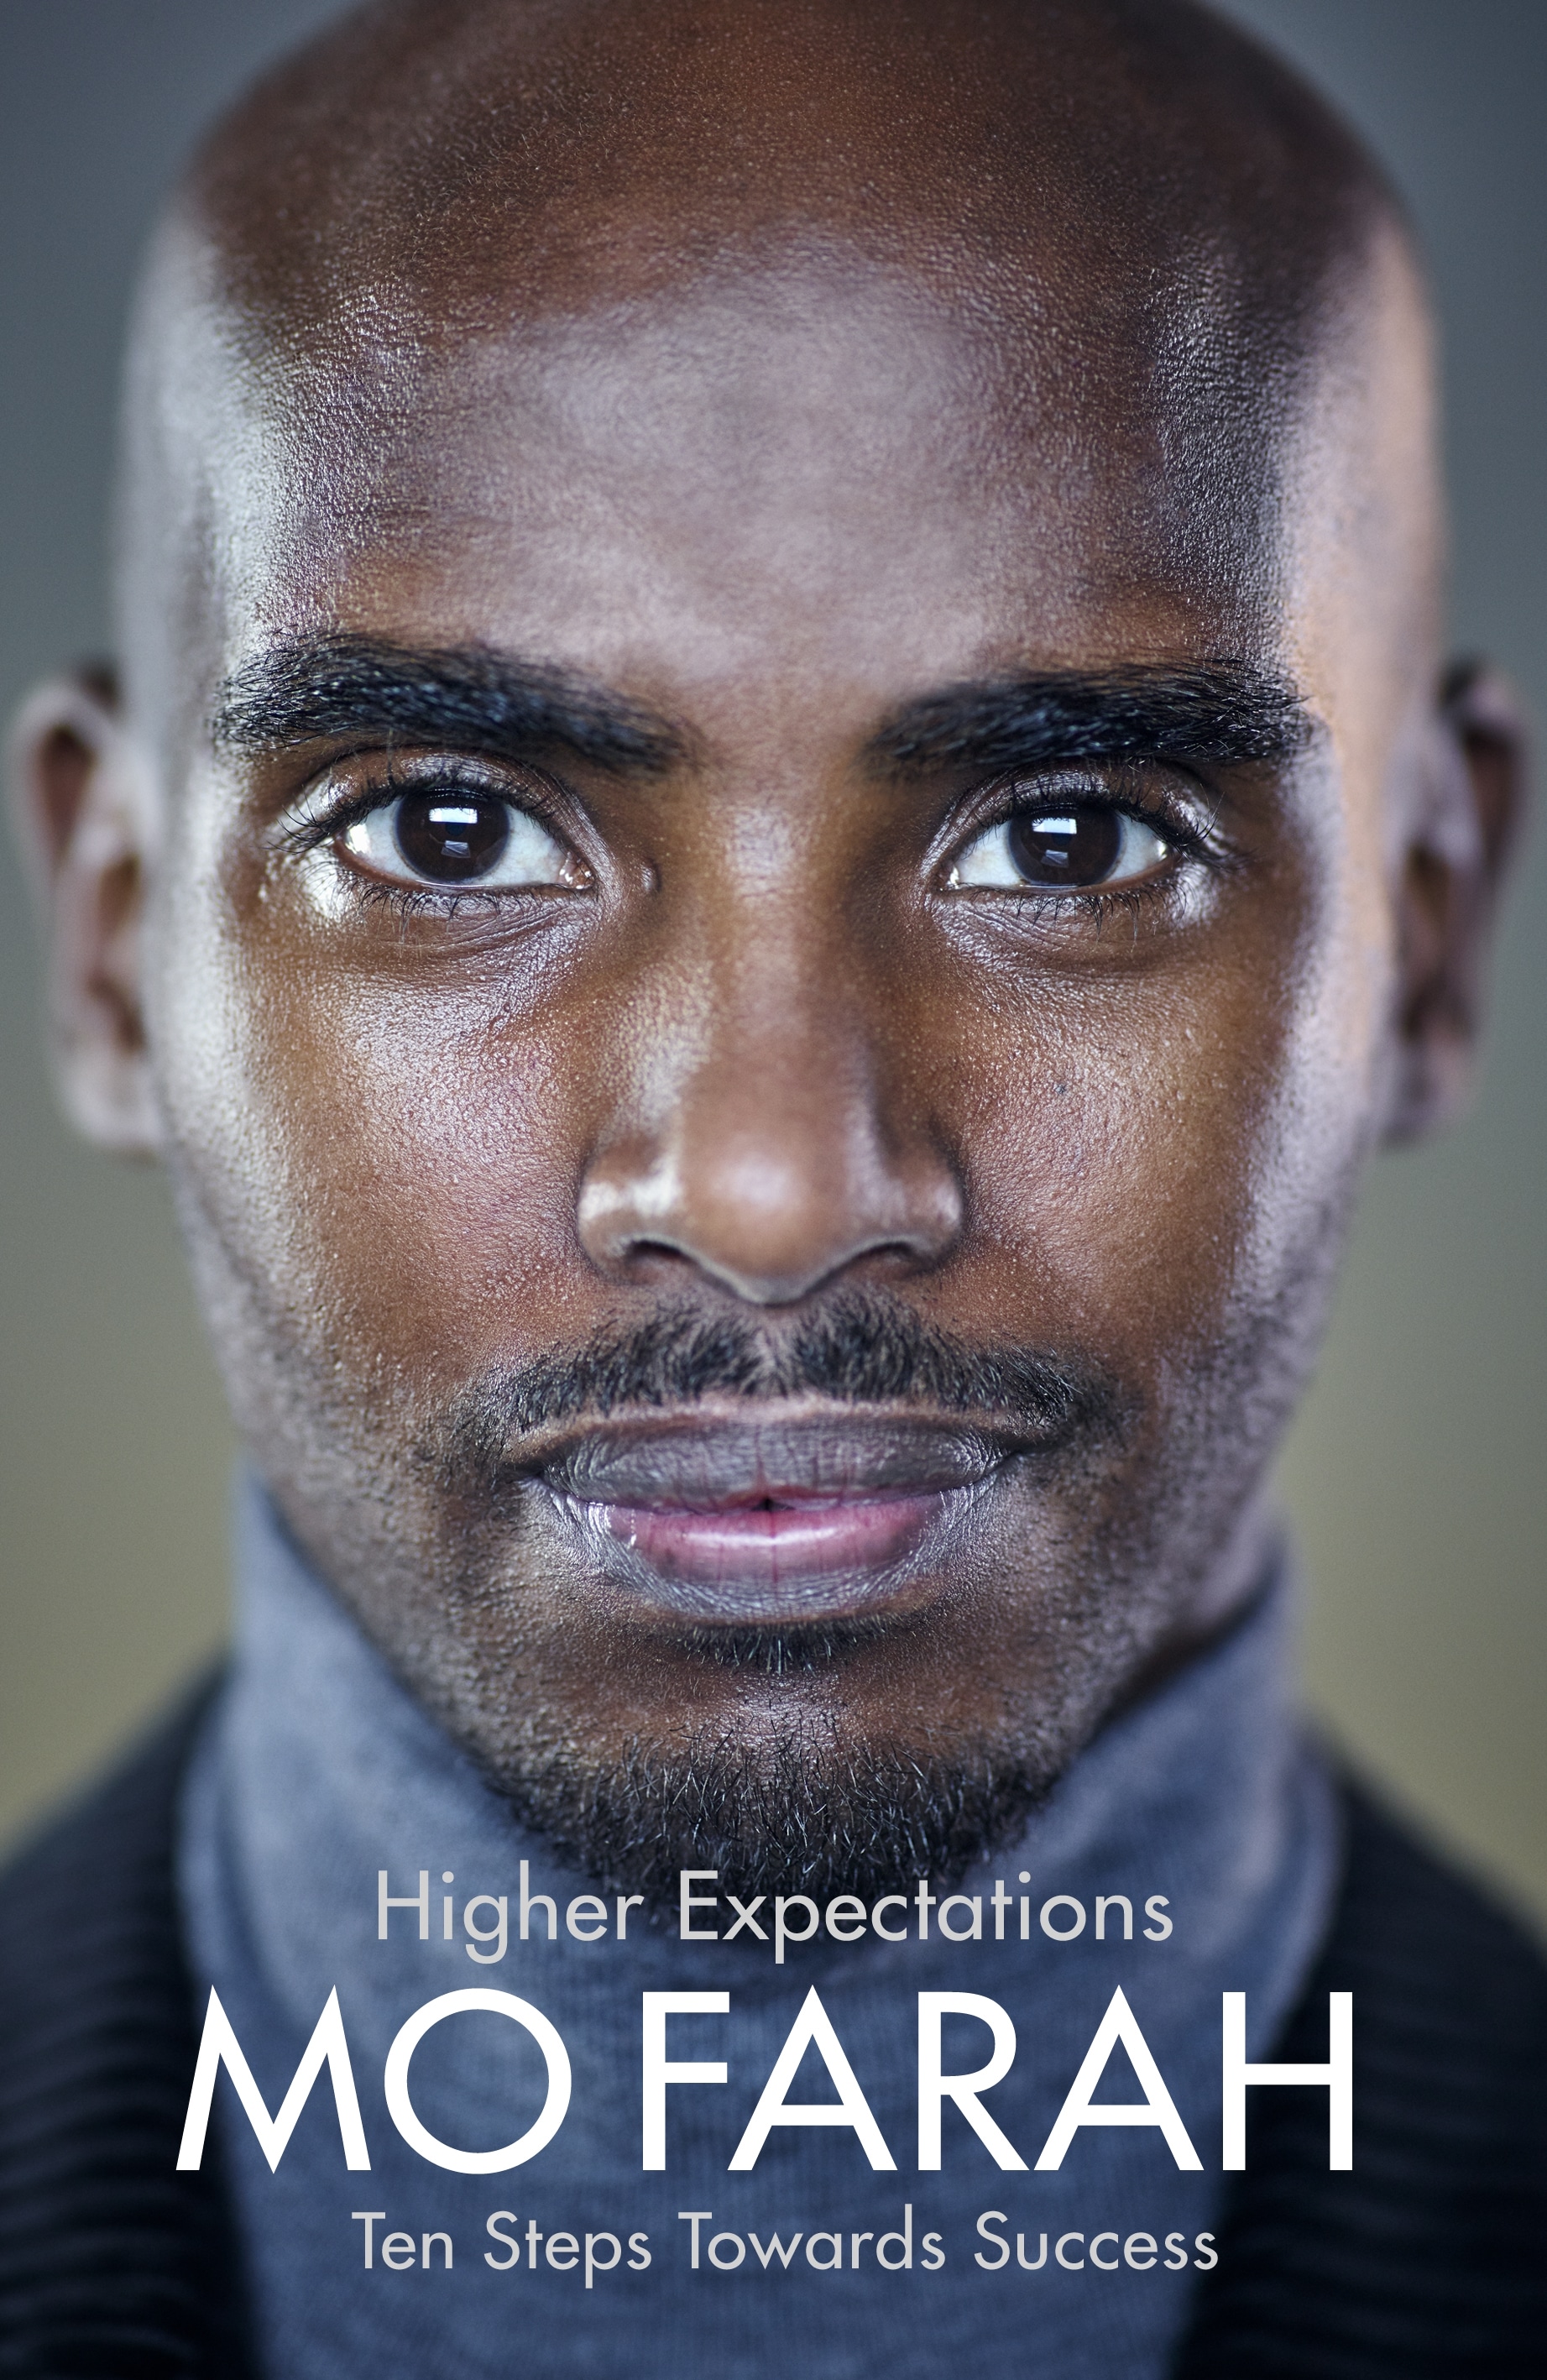 Book “Higher Expectations” by Mo Farah — September 29, 2022